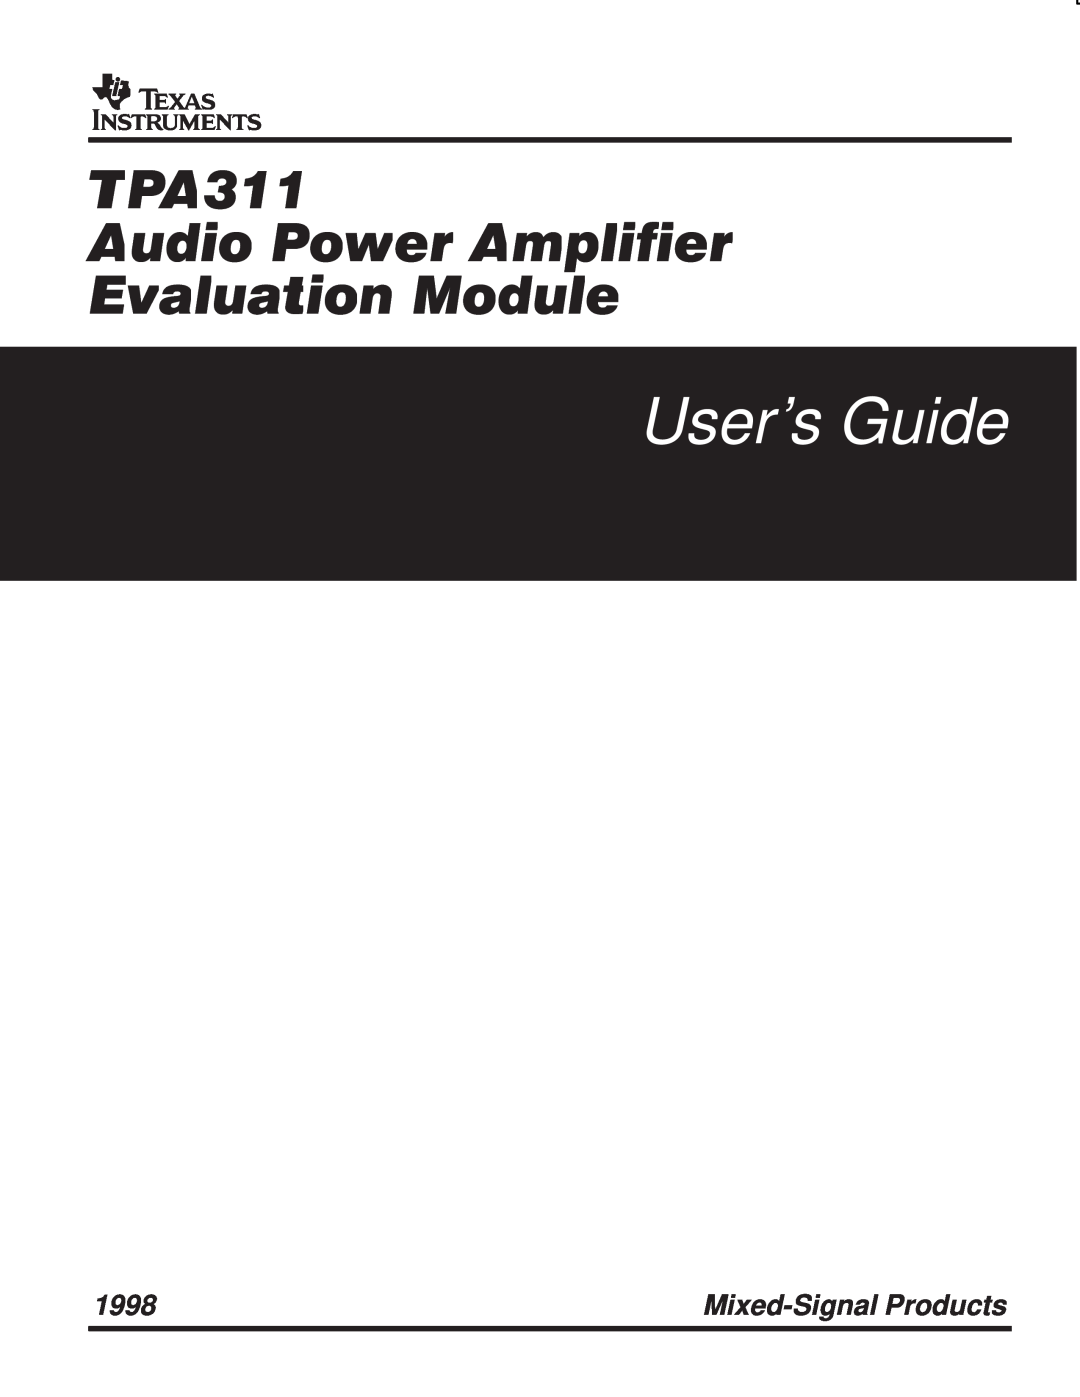 Texas Instruments TPA 311 manual Users Guide, TPA311 Audio Power Amplifier Evaluation Module, 1998, Mixed-Signal Products 